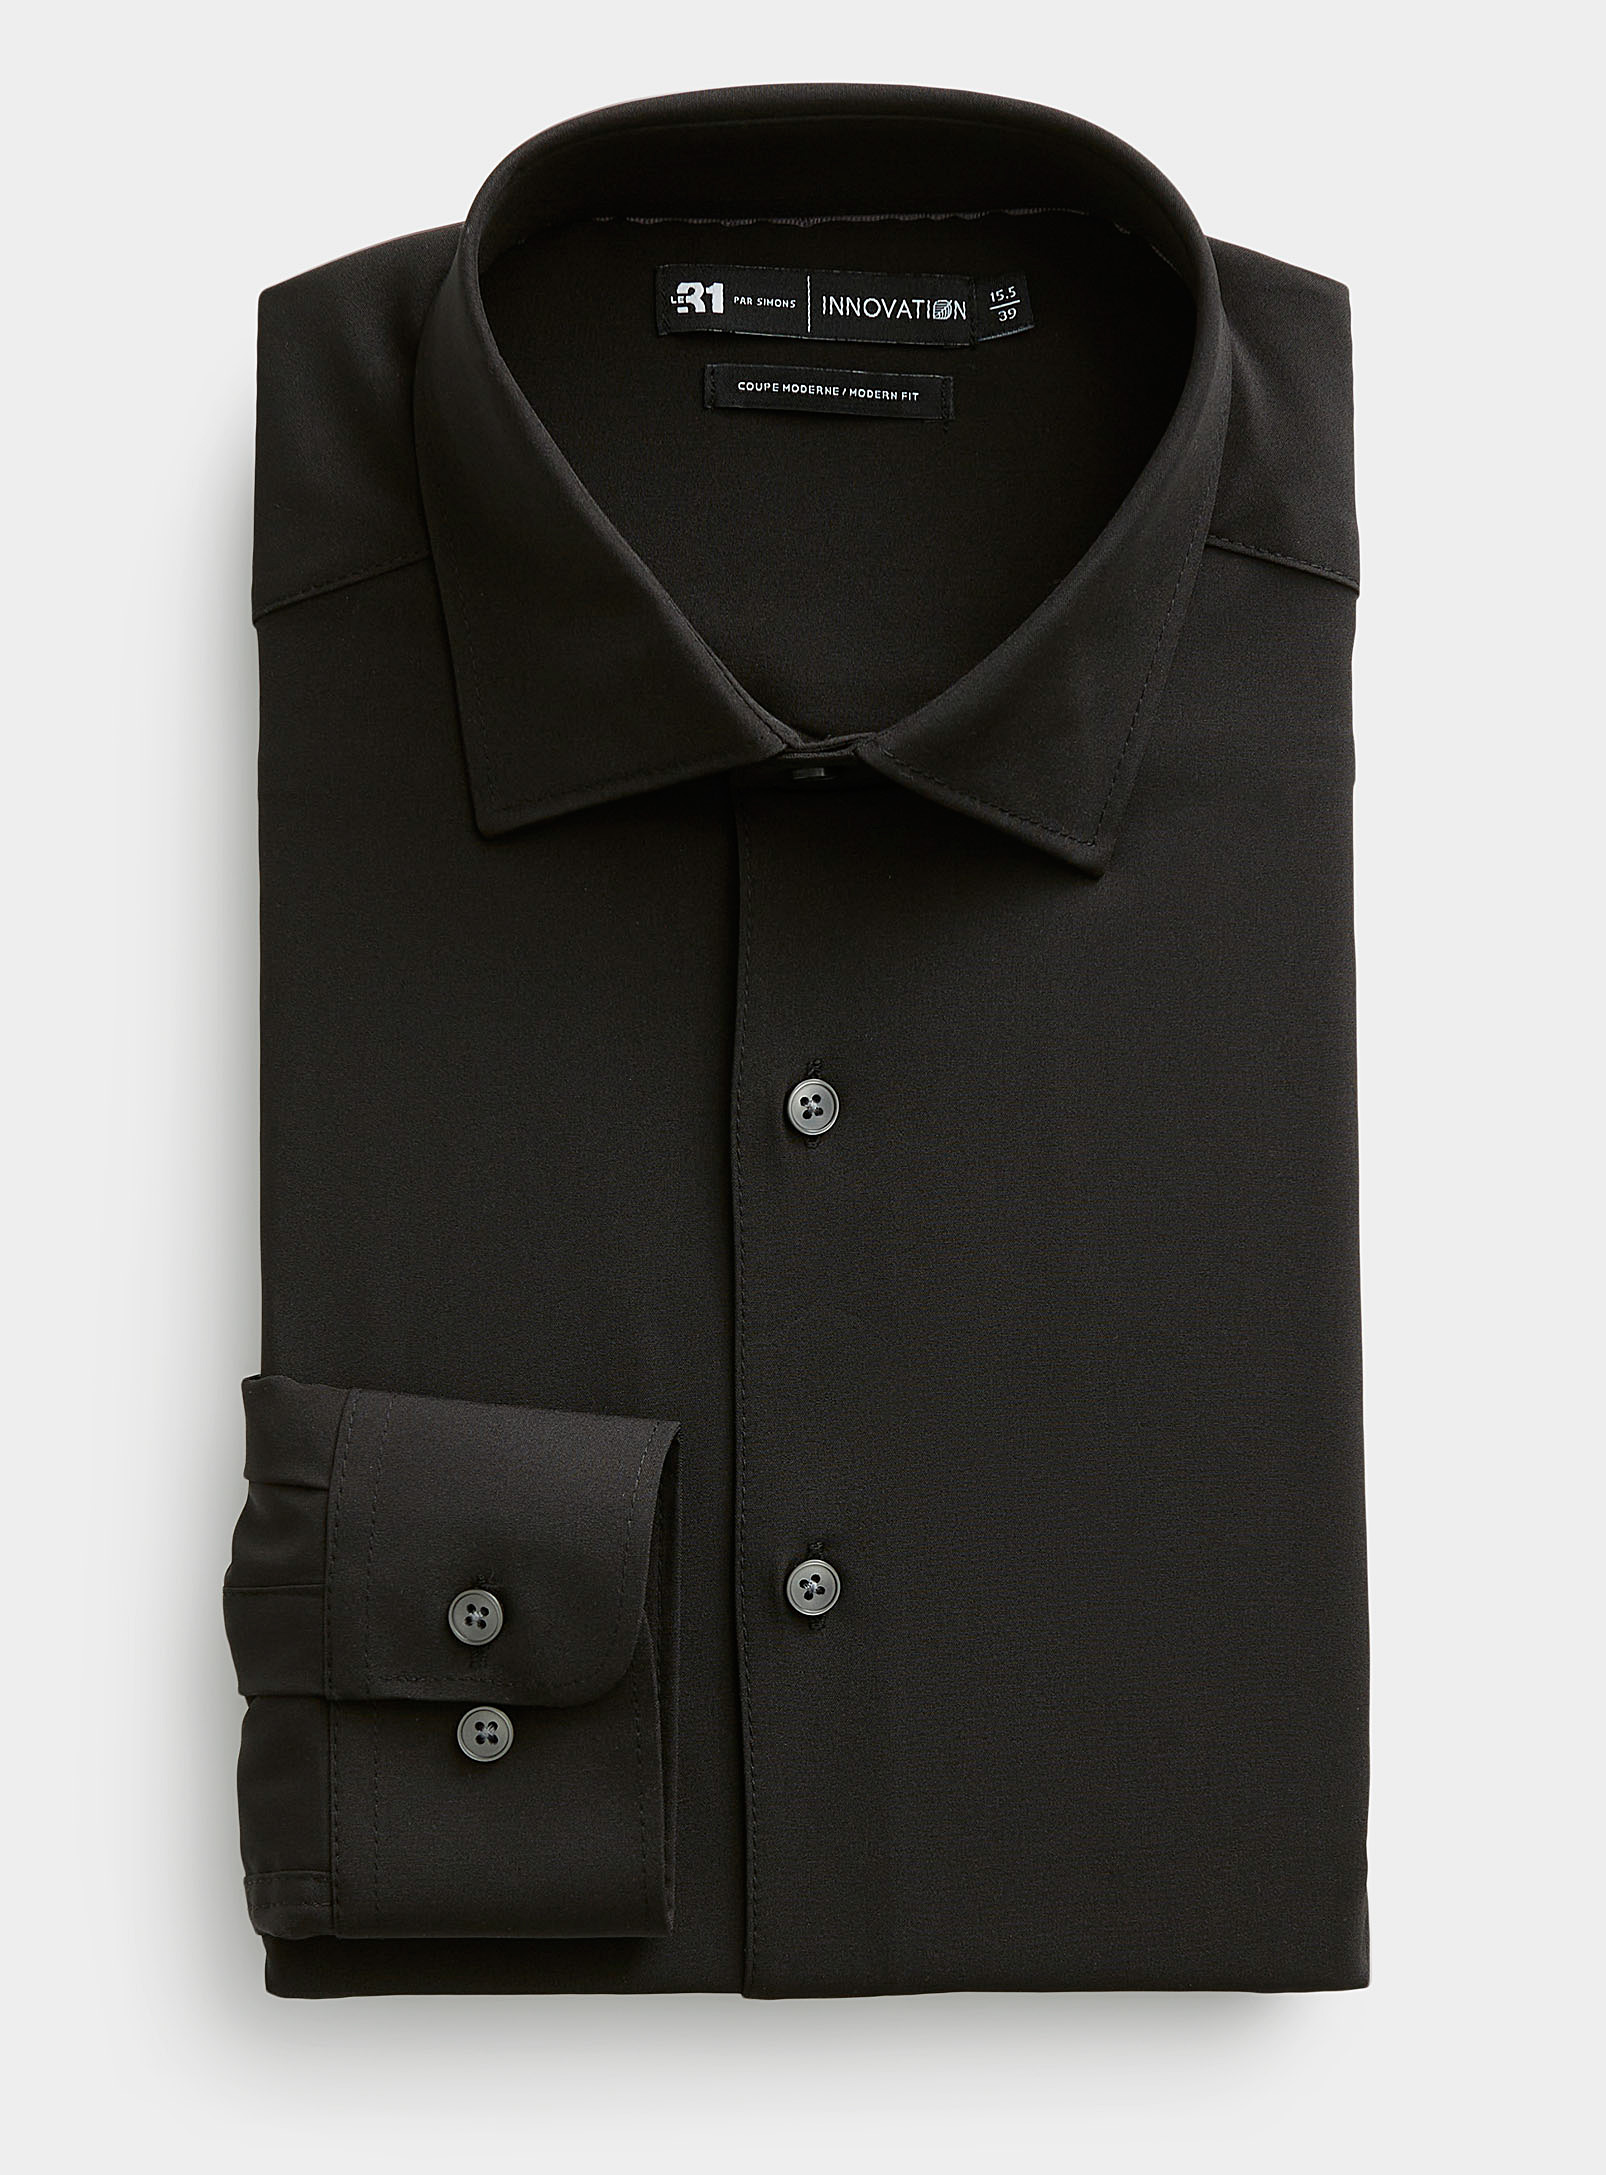 Le 31 Monochrome Fluid Shirt Modern Fit Innovation Collection In Black